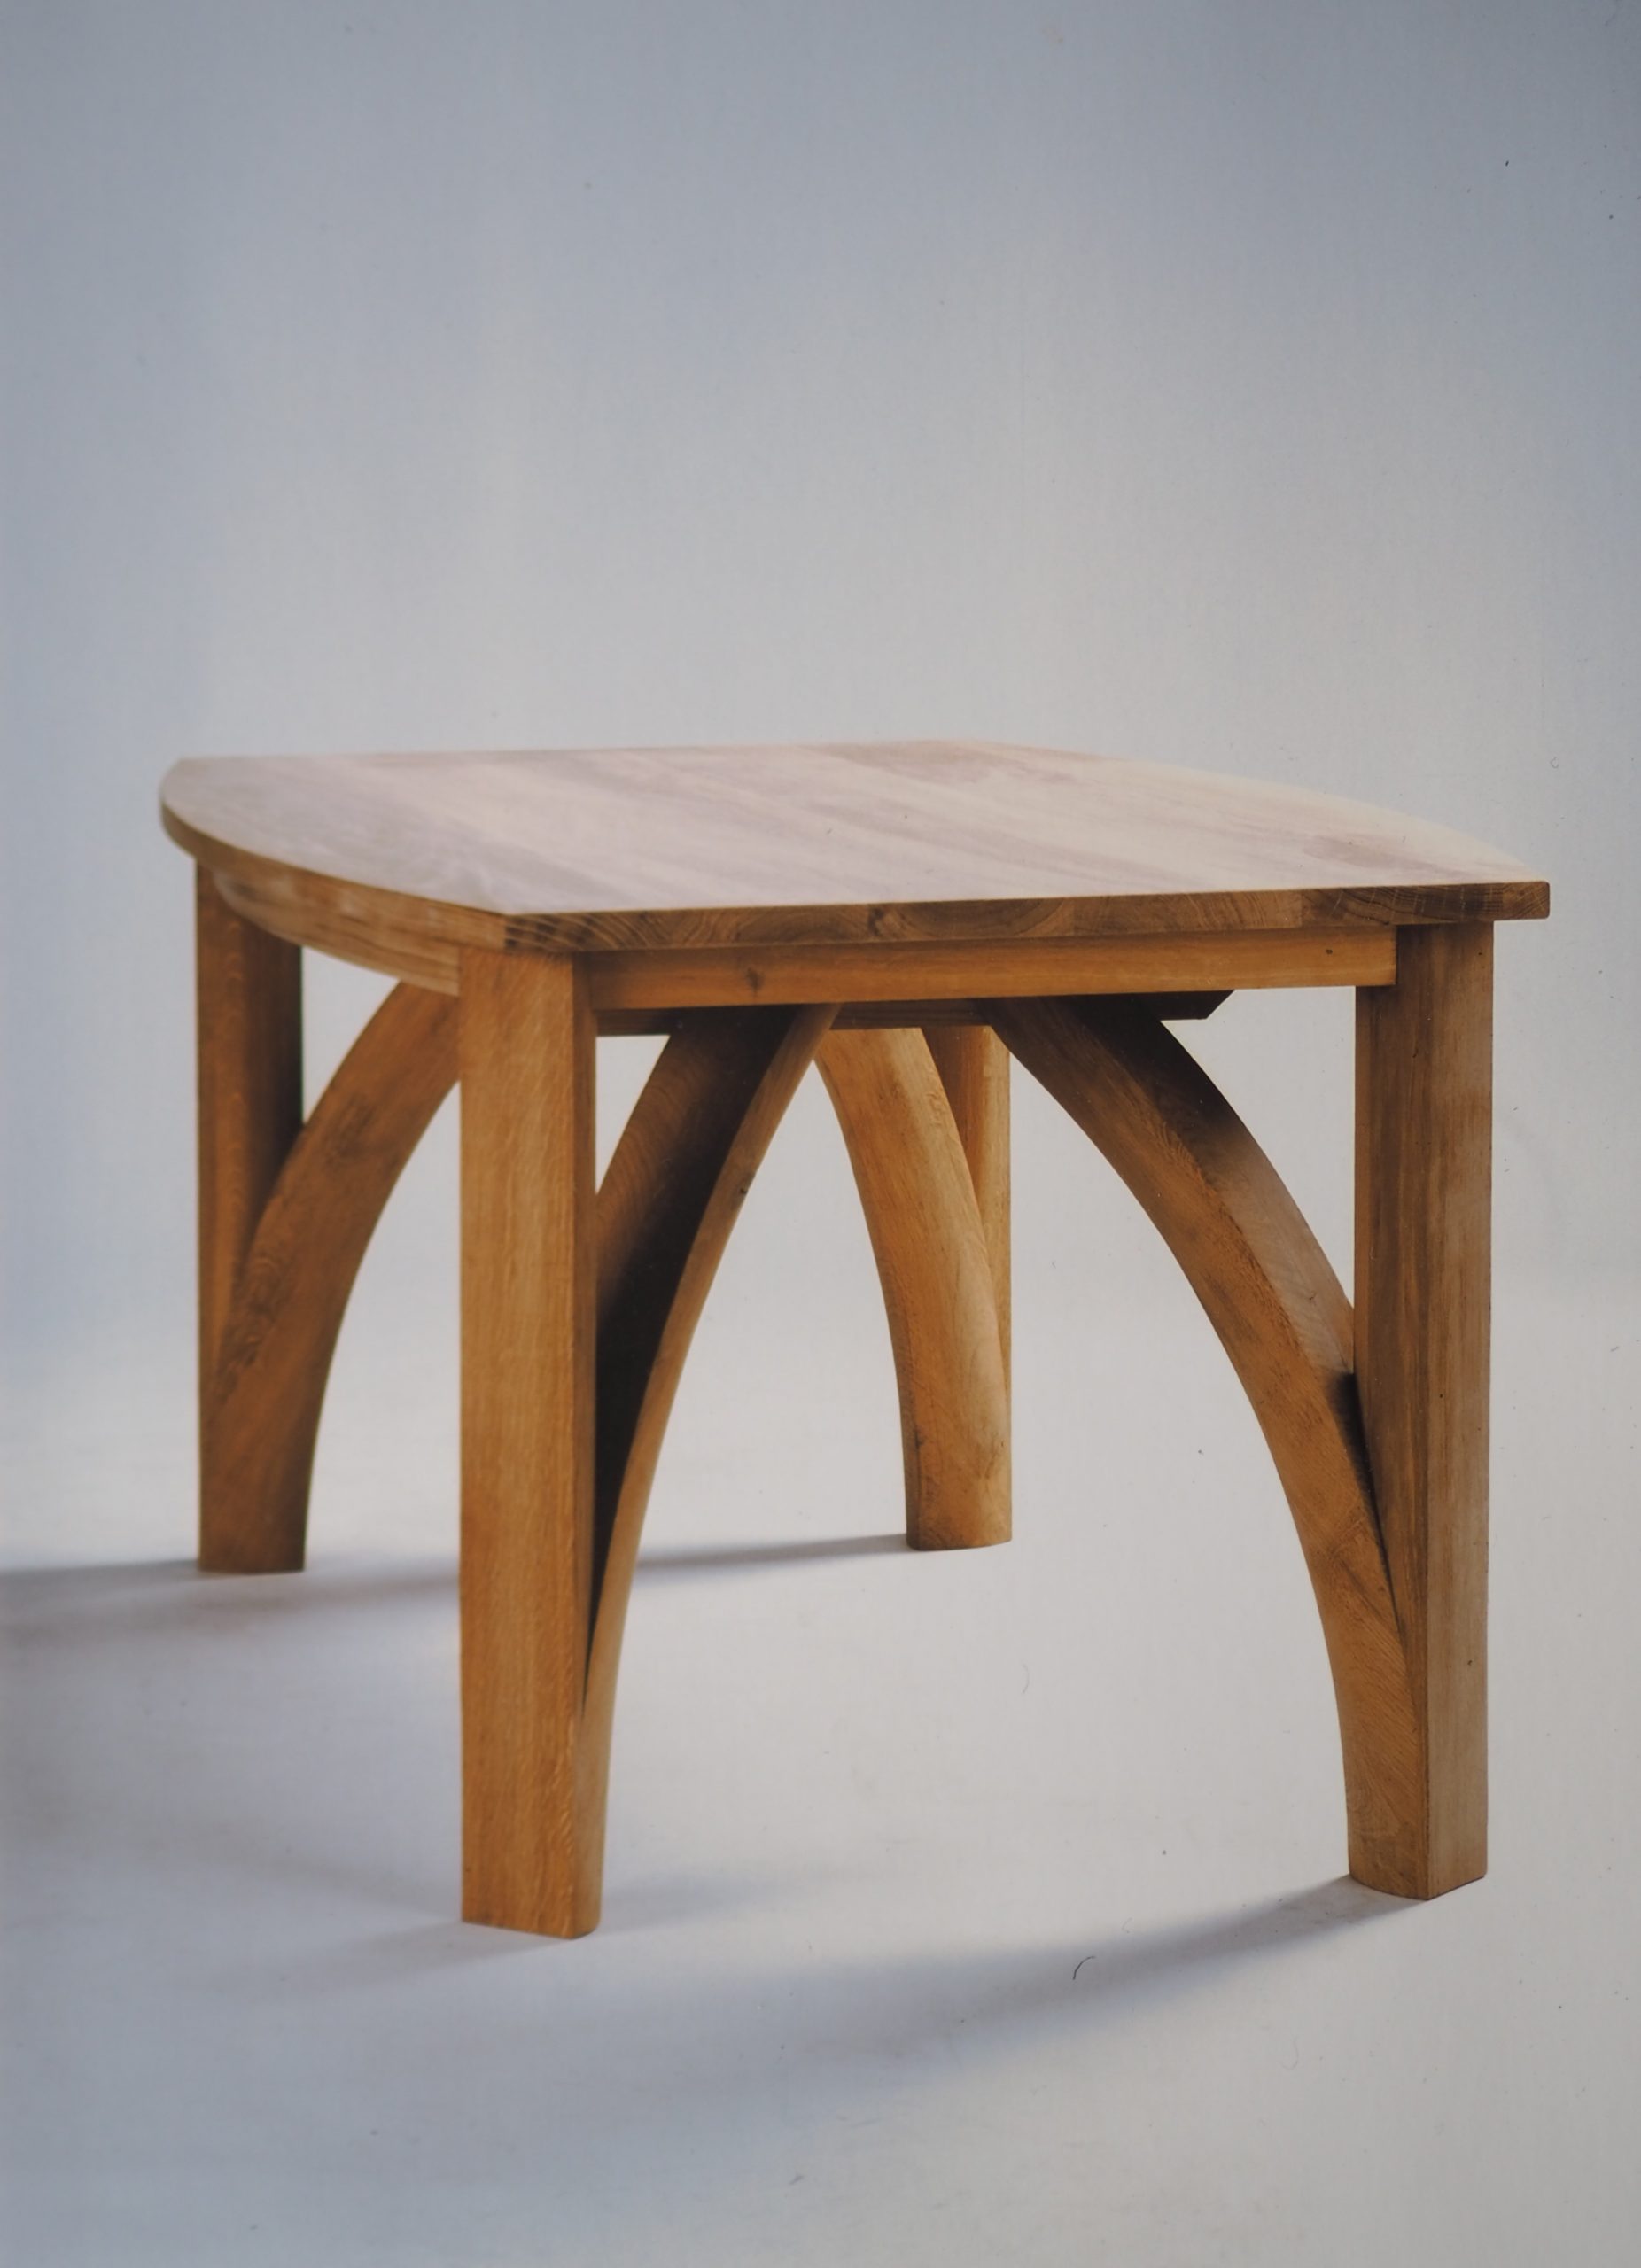 English oak Gothic inspired dining table. hand shaped legs below a convex solid top.